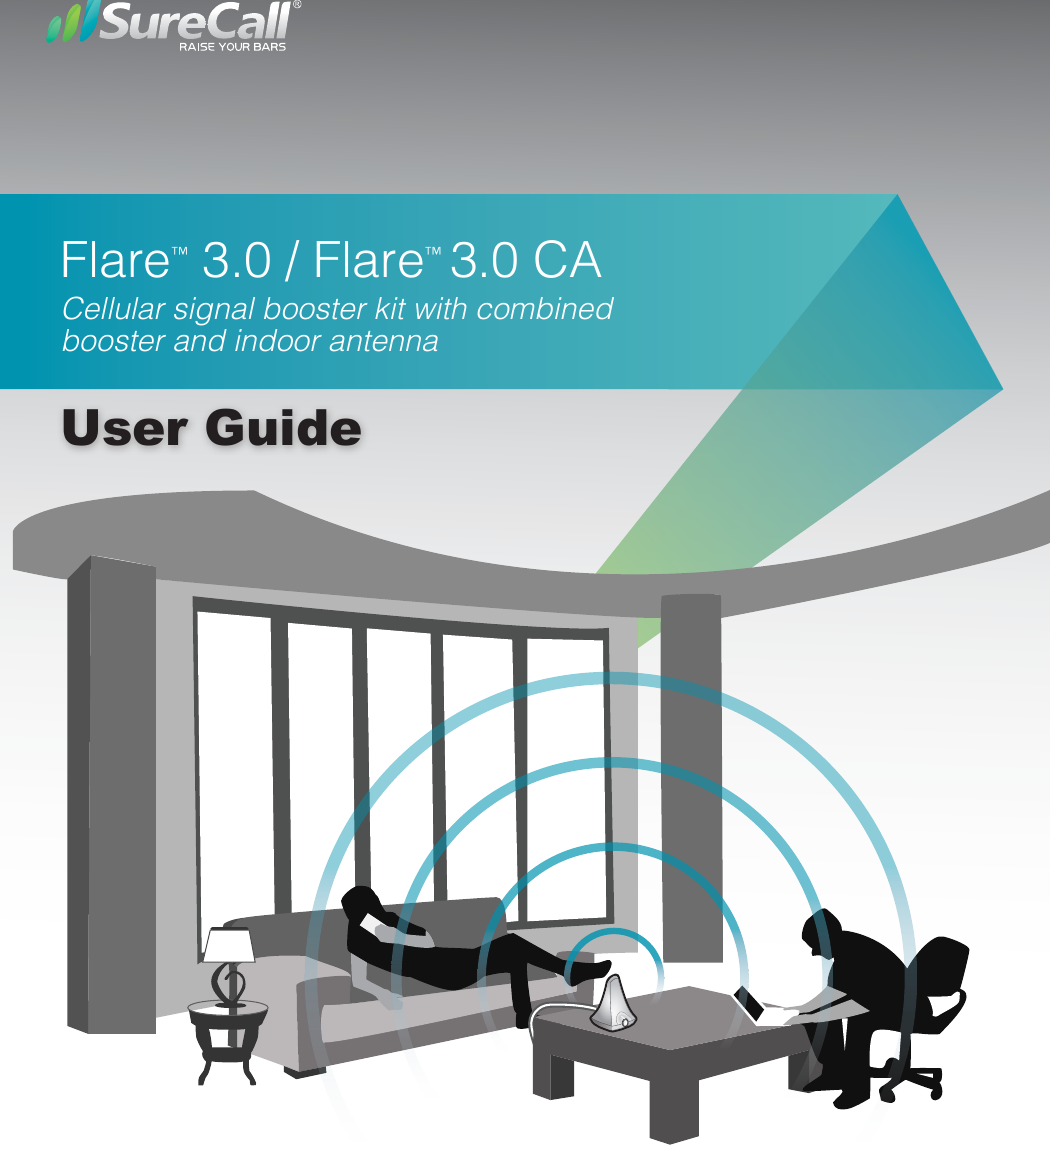 Flare™ 3.0 / Flare™ 3.0 CA Cellular signal booster kit with combined booster and indoor antenna User Guide